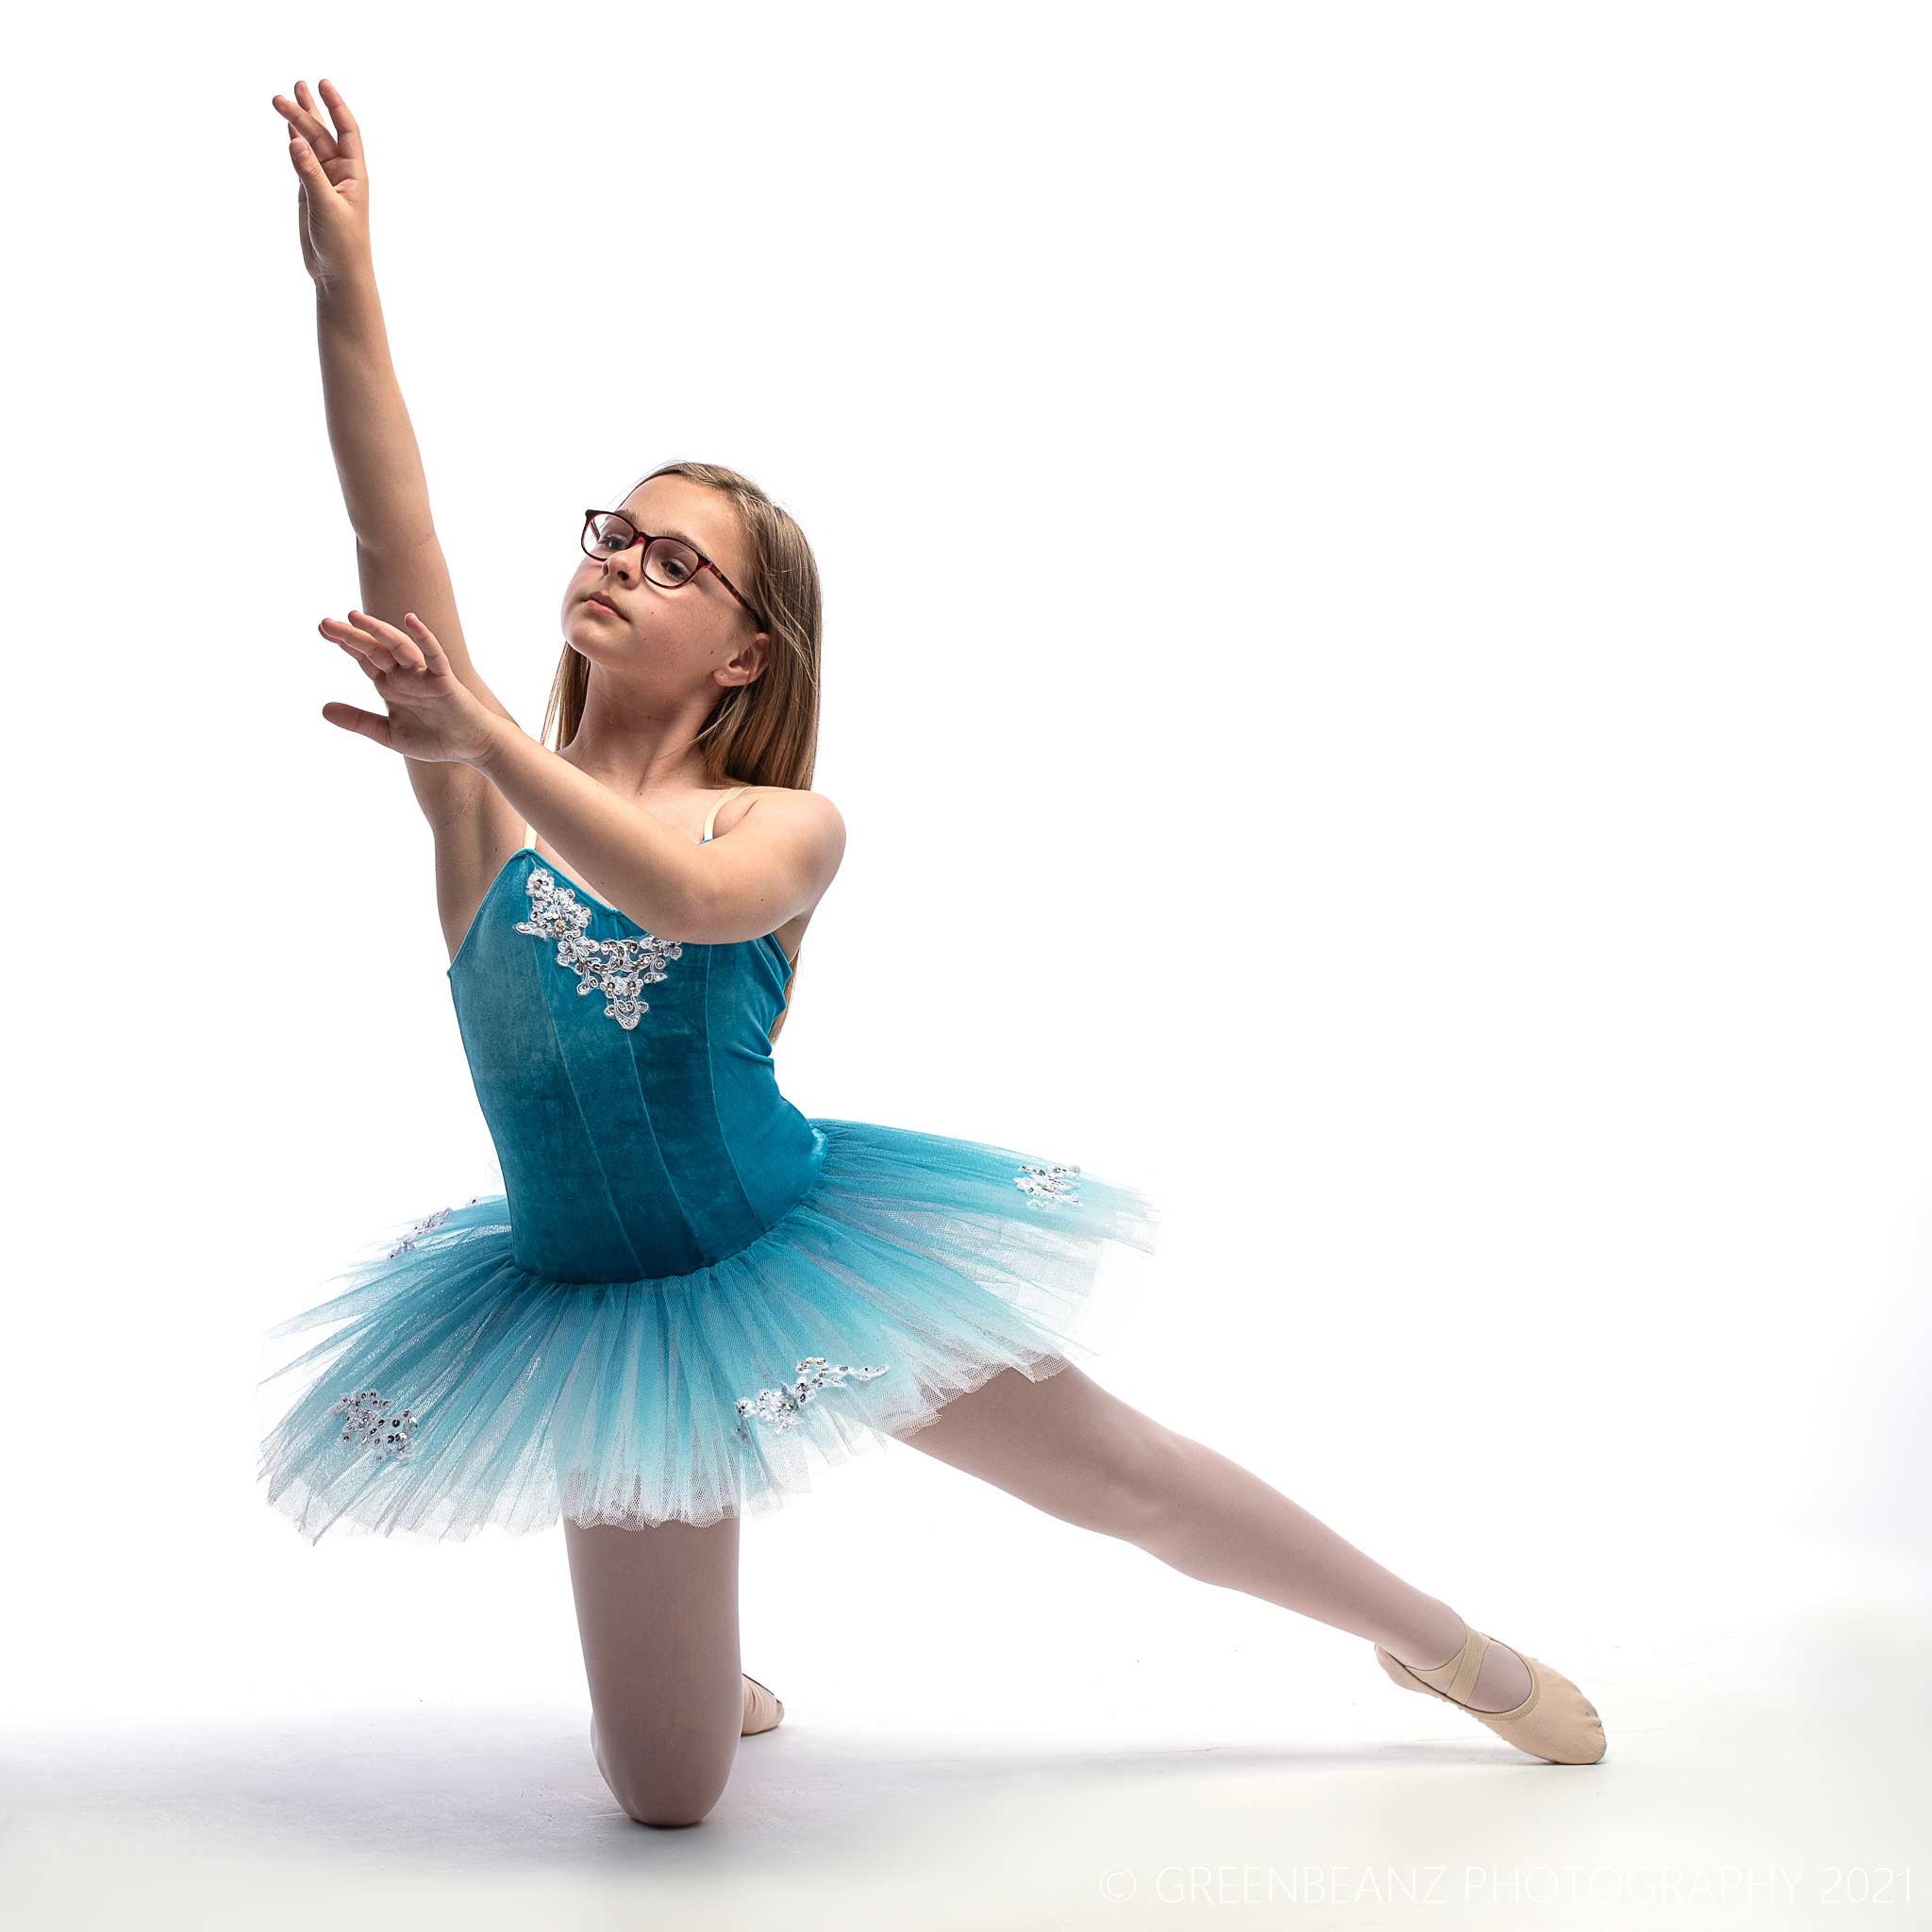 Plymouth Family Portrait photographer captures Dancer Lucy 